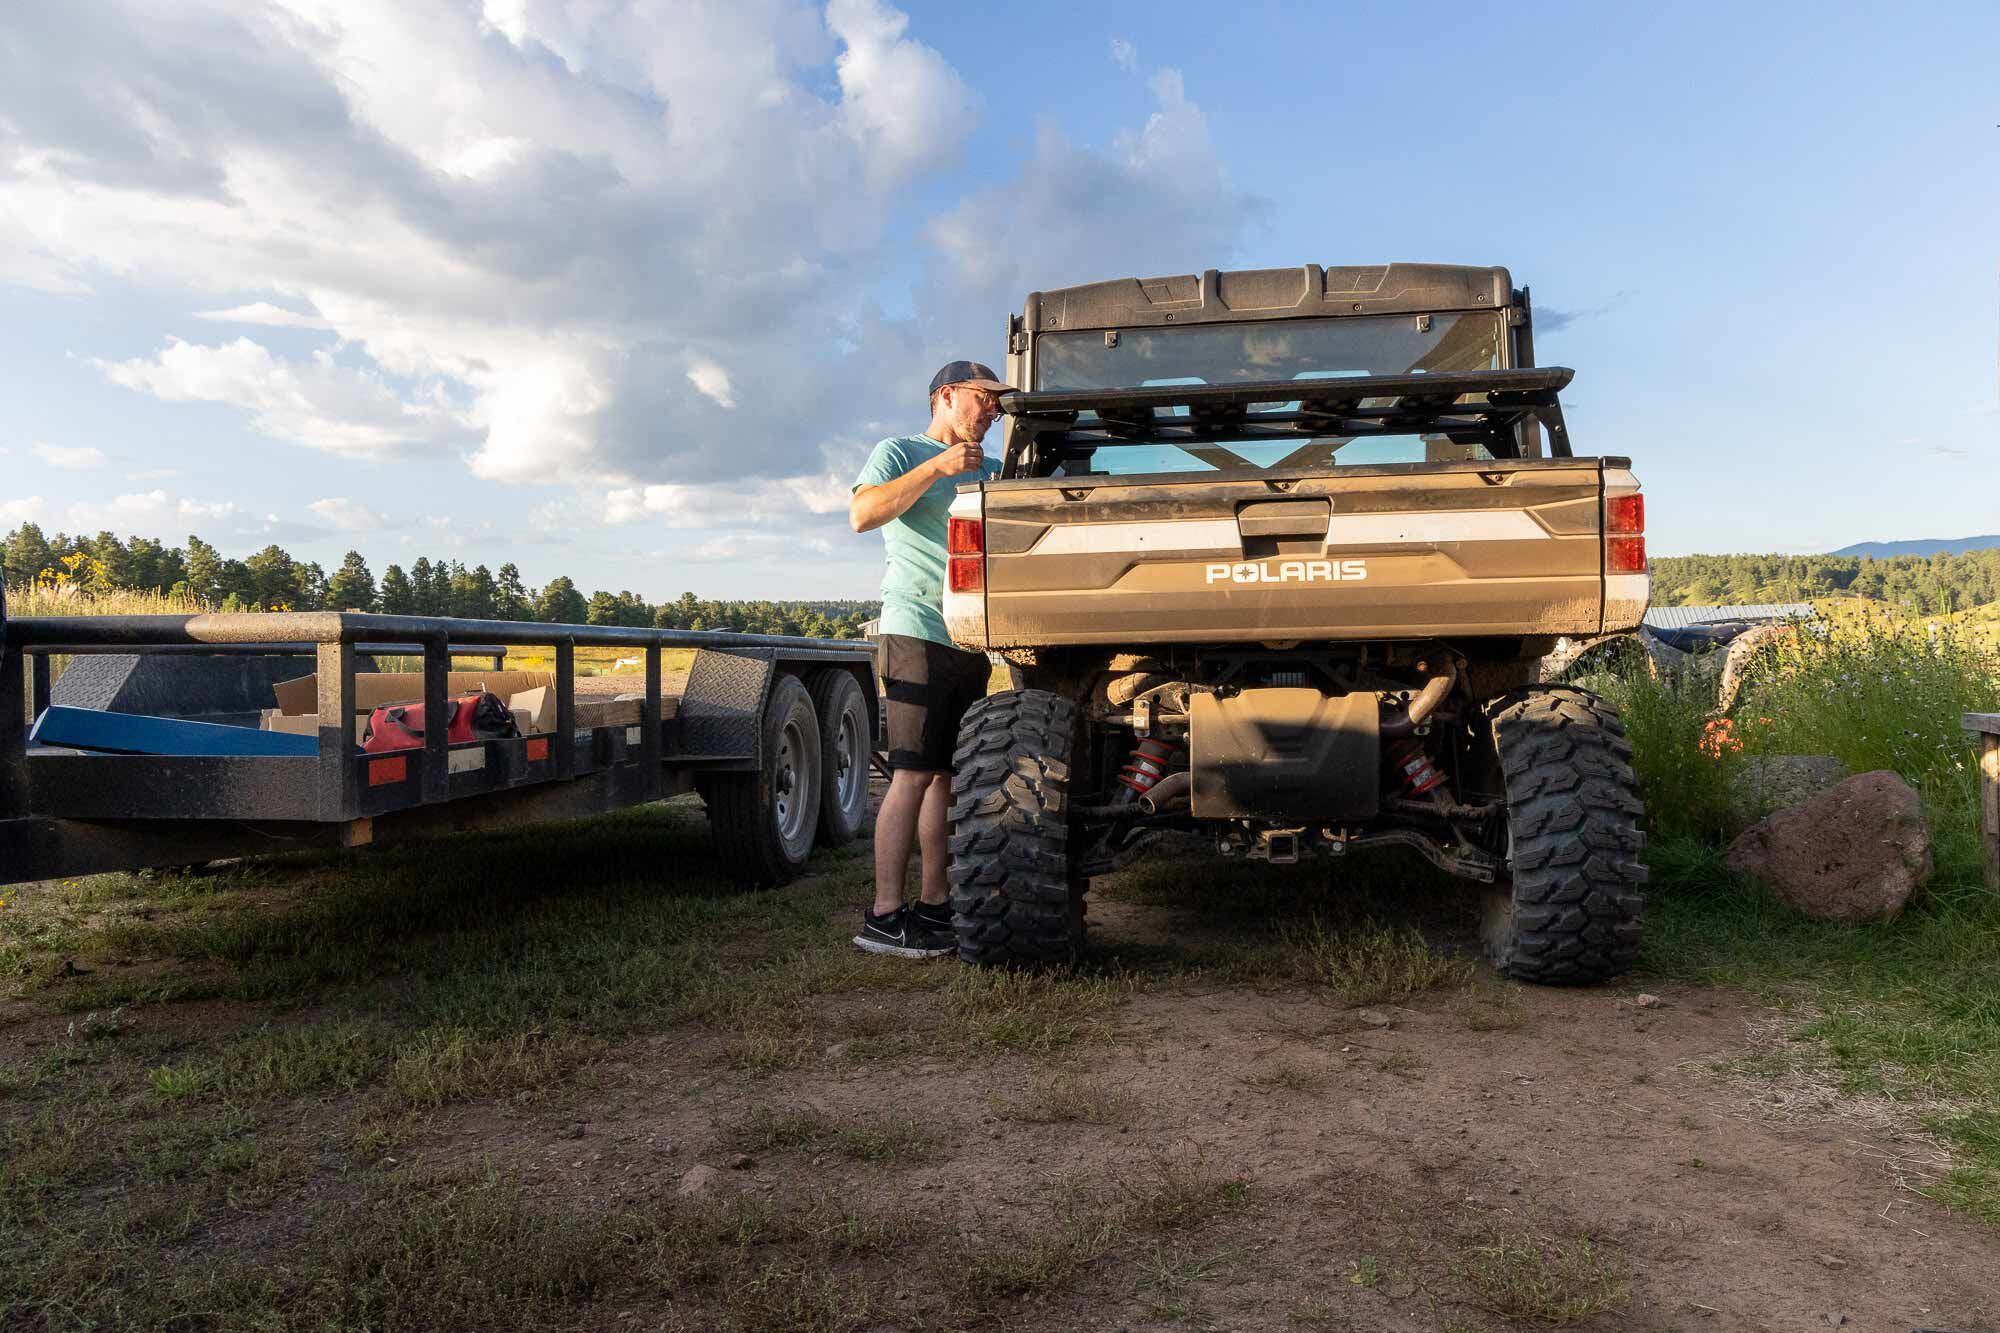 Putting the final touches on our Rhino-Rack bed rack just as the sun starts to set.